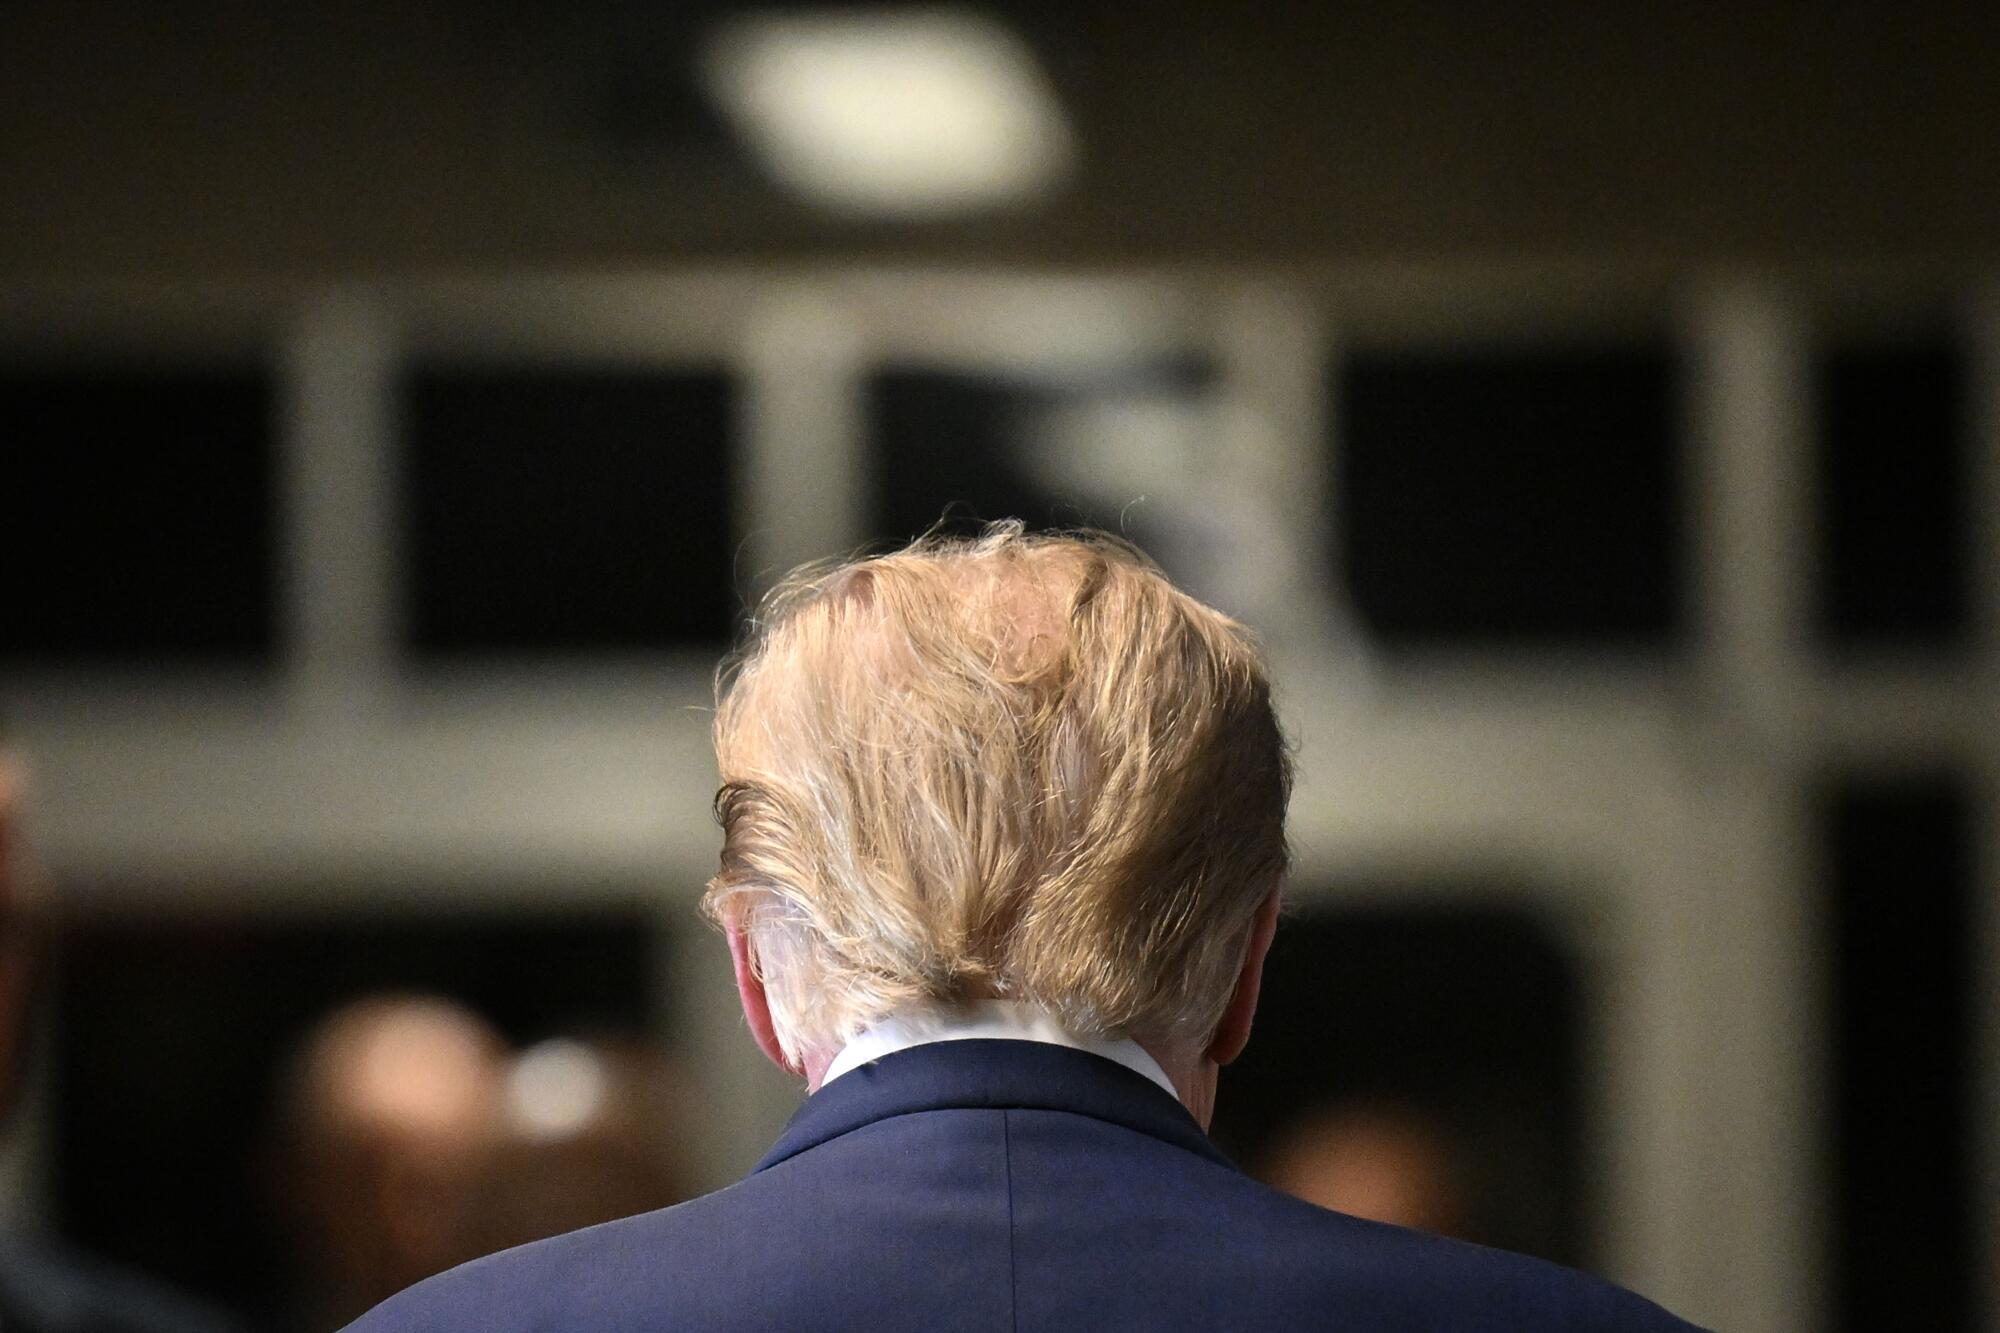 Former President Trump, pictured from behind, from the top of his shoulders up, with a large, out-of-focus room beyond him.